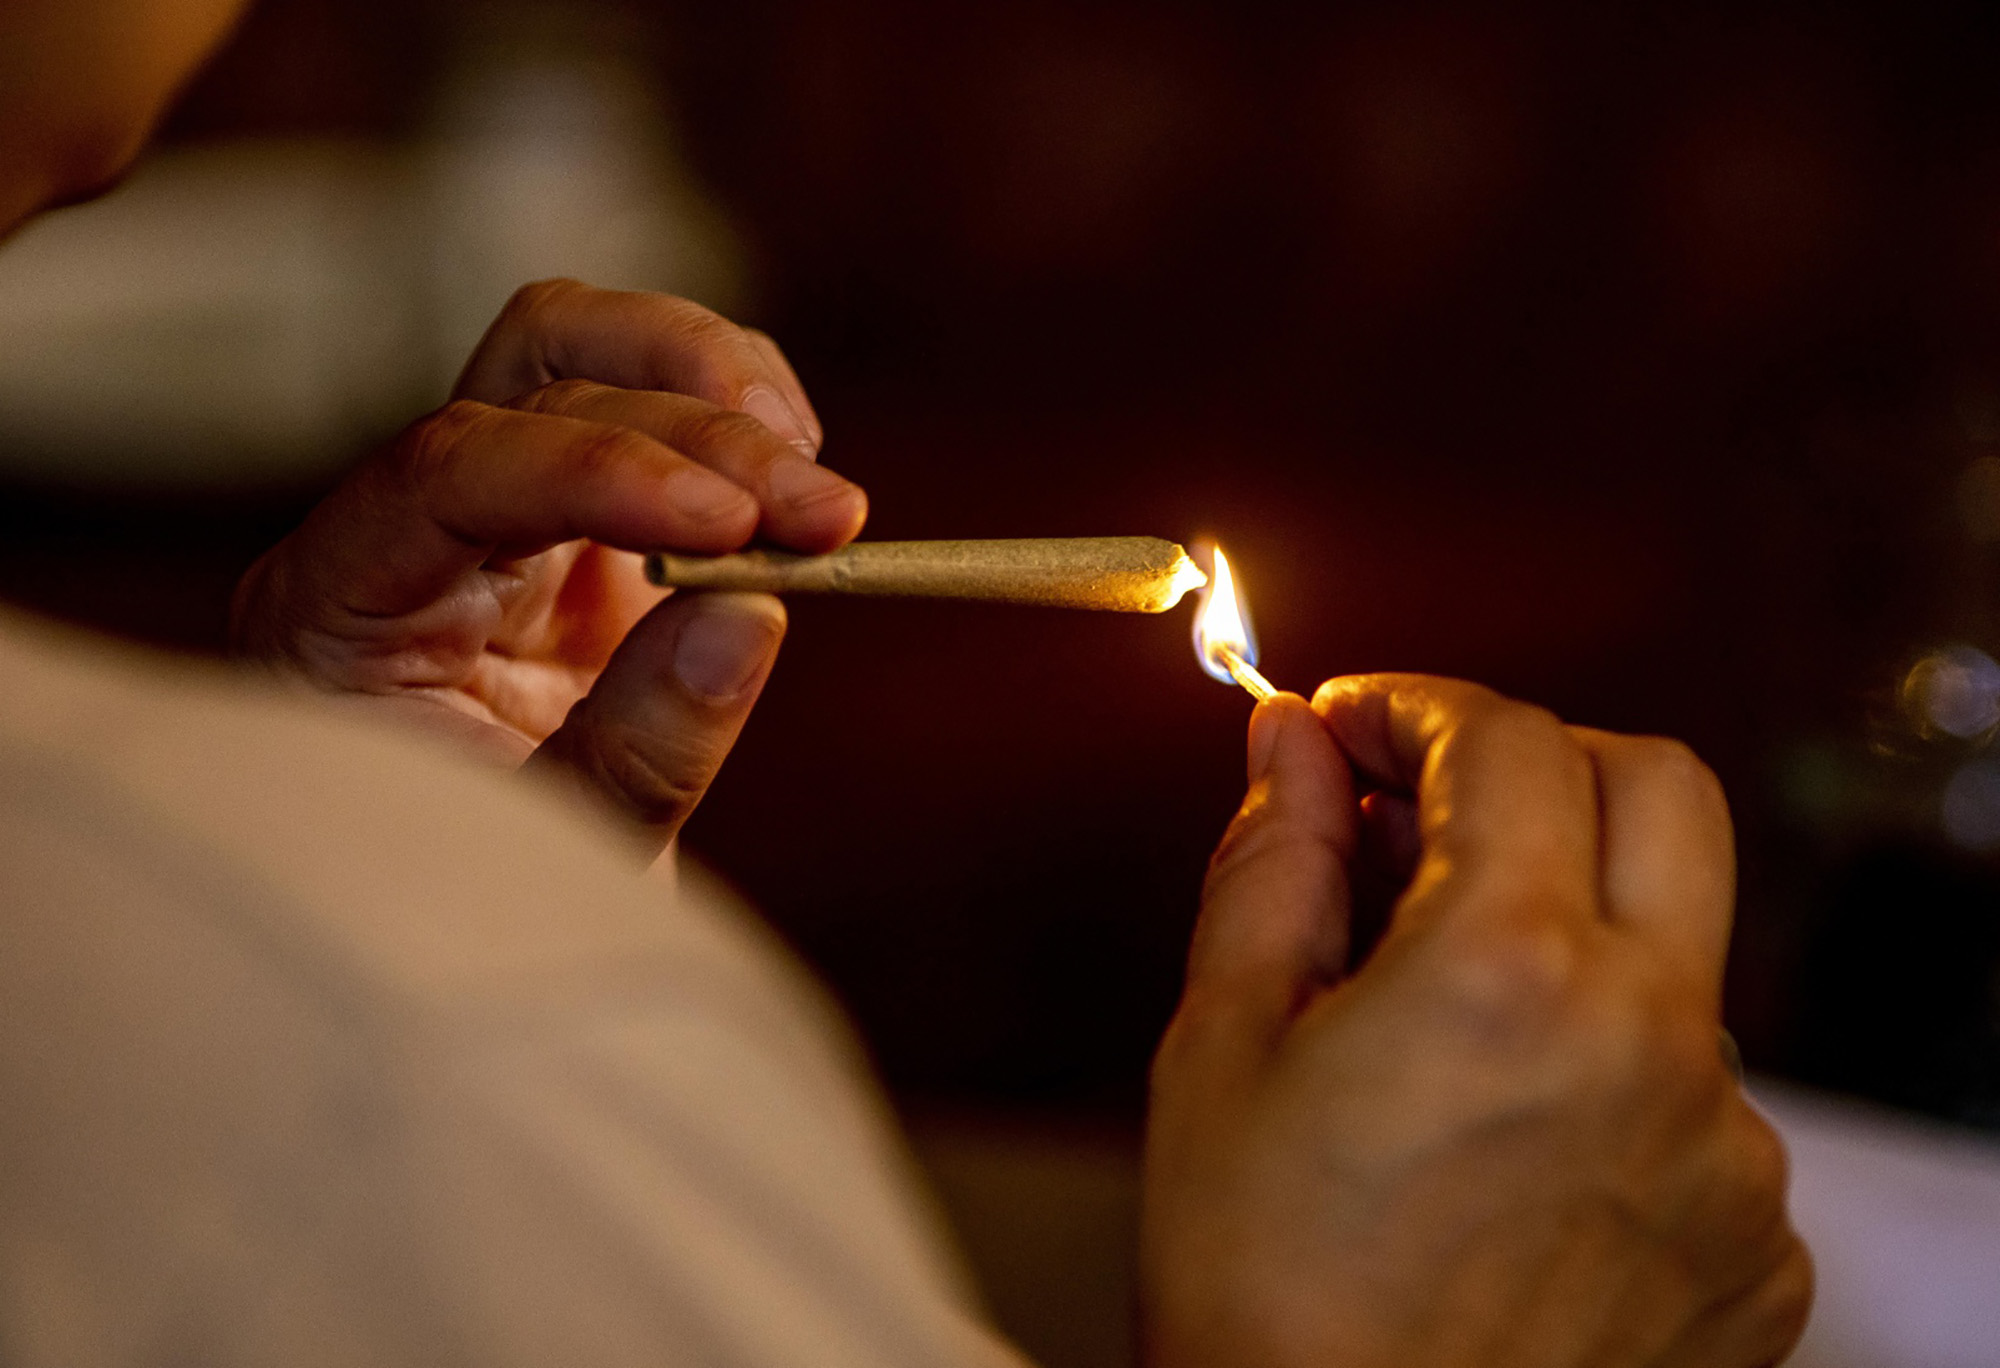 A person lights a joint&nbsp;in West Hollywood, California.